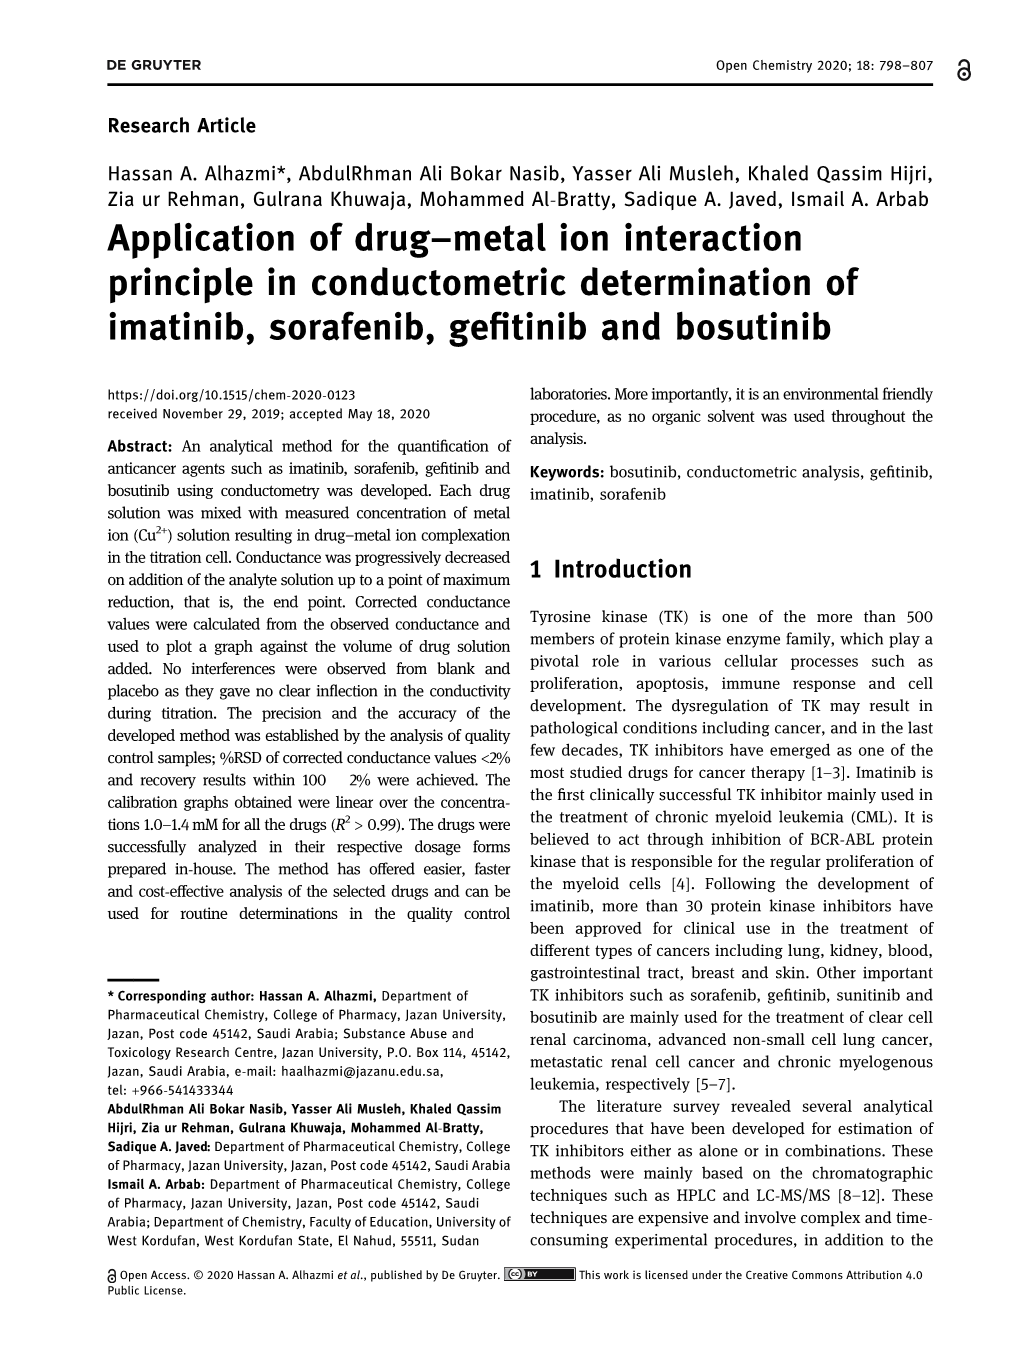 Application of Drug–Metal Ion Interaction Principle In